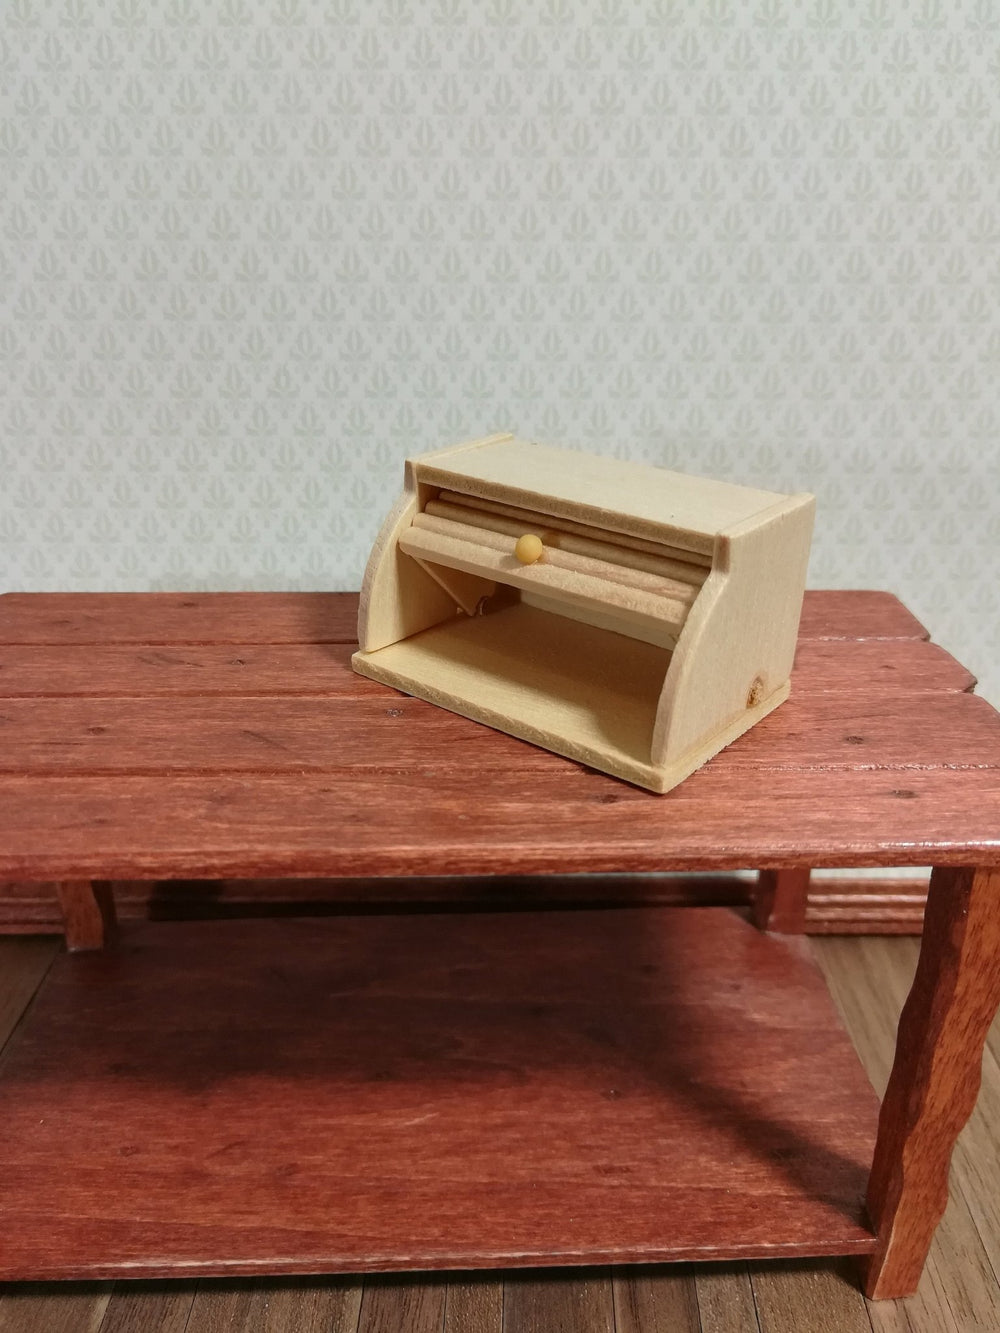 Dollhouse Miniature Bread Box Unfinished with Opening Door 1:12 Scale - Miniature Crush